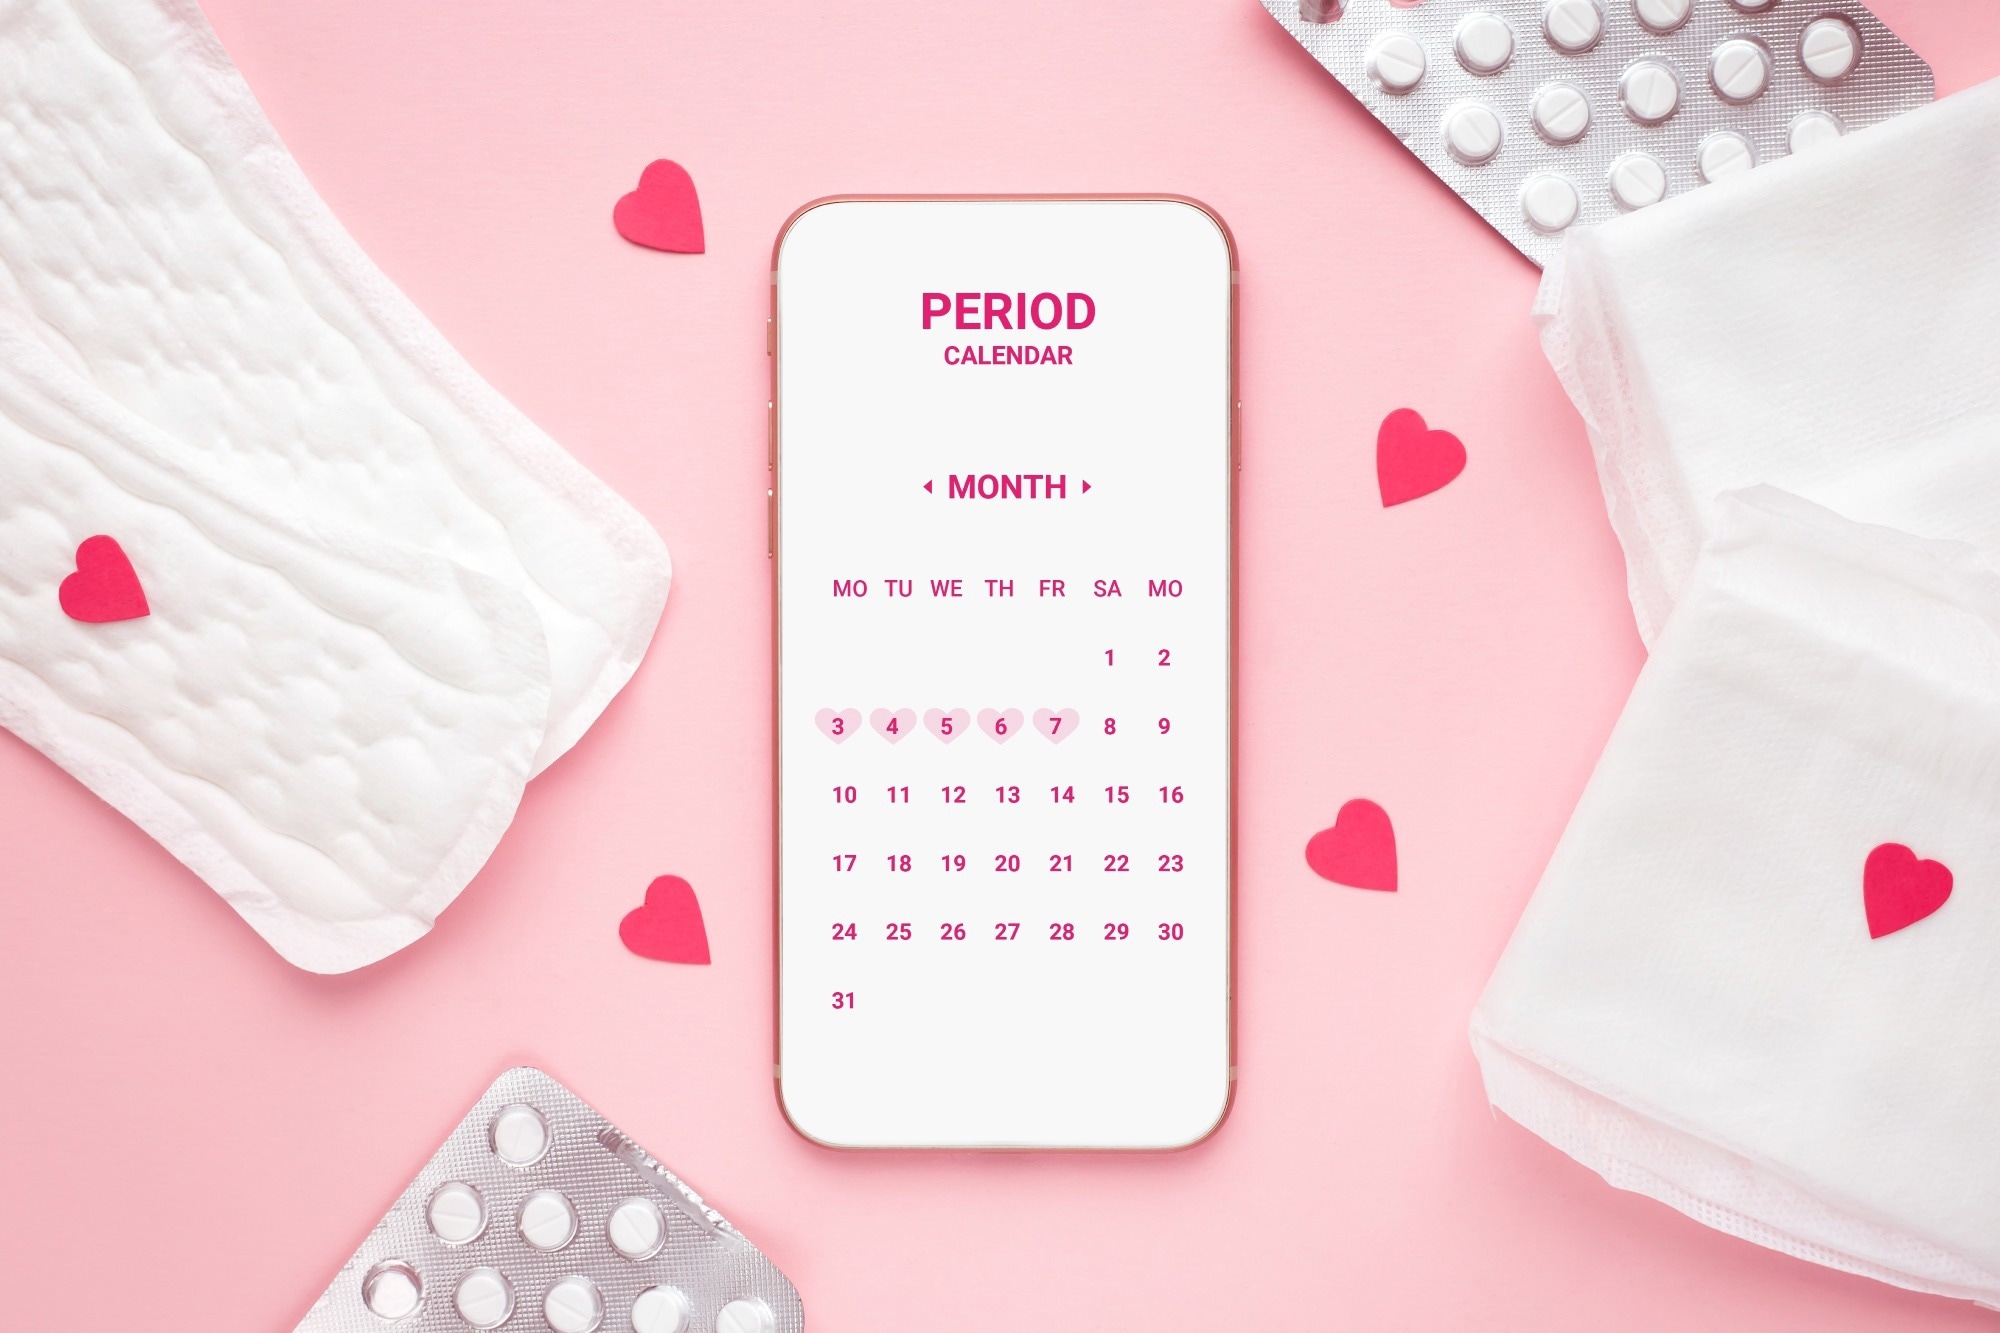 Study: Menstrual cycle length variation by demographic characteristics from the Apple Women’s Health Study. Image Credit: E.Va/Shutterstock.com